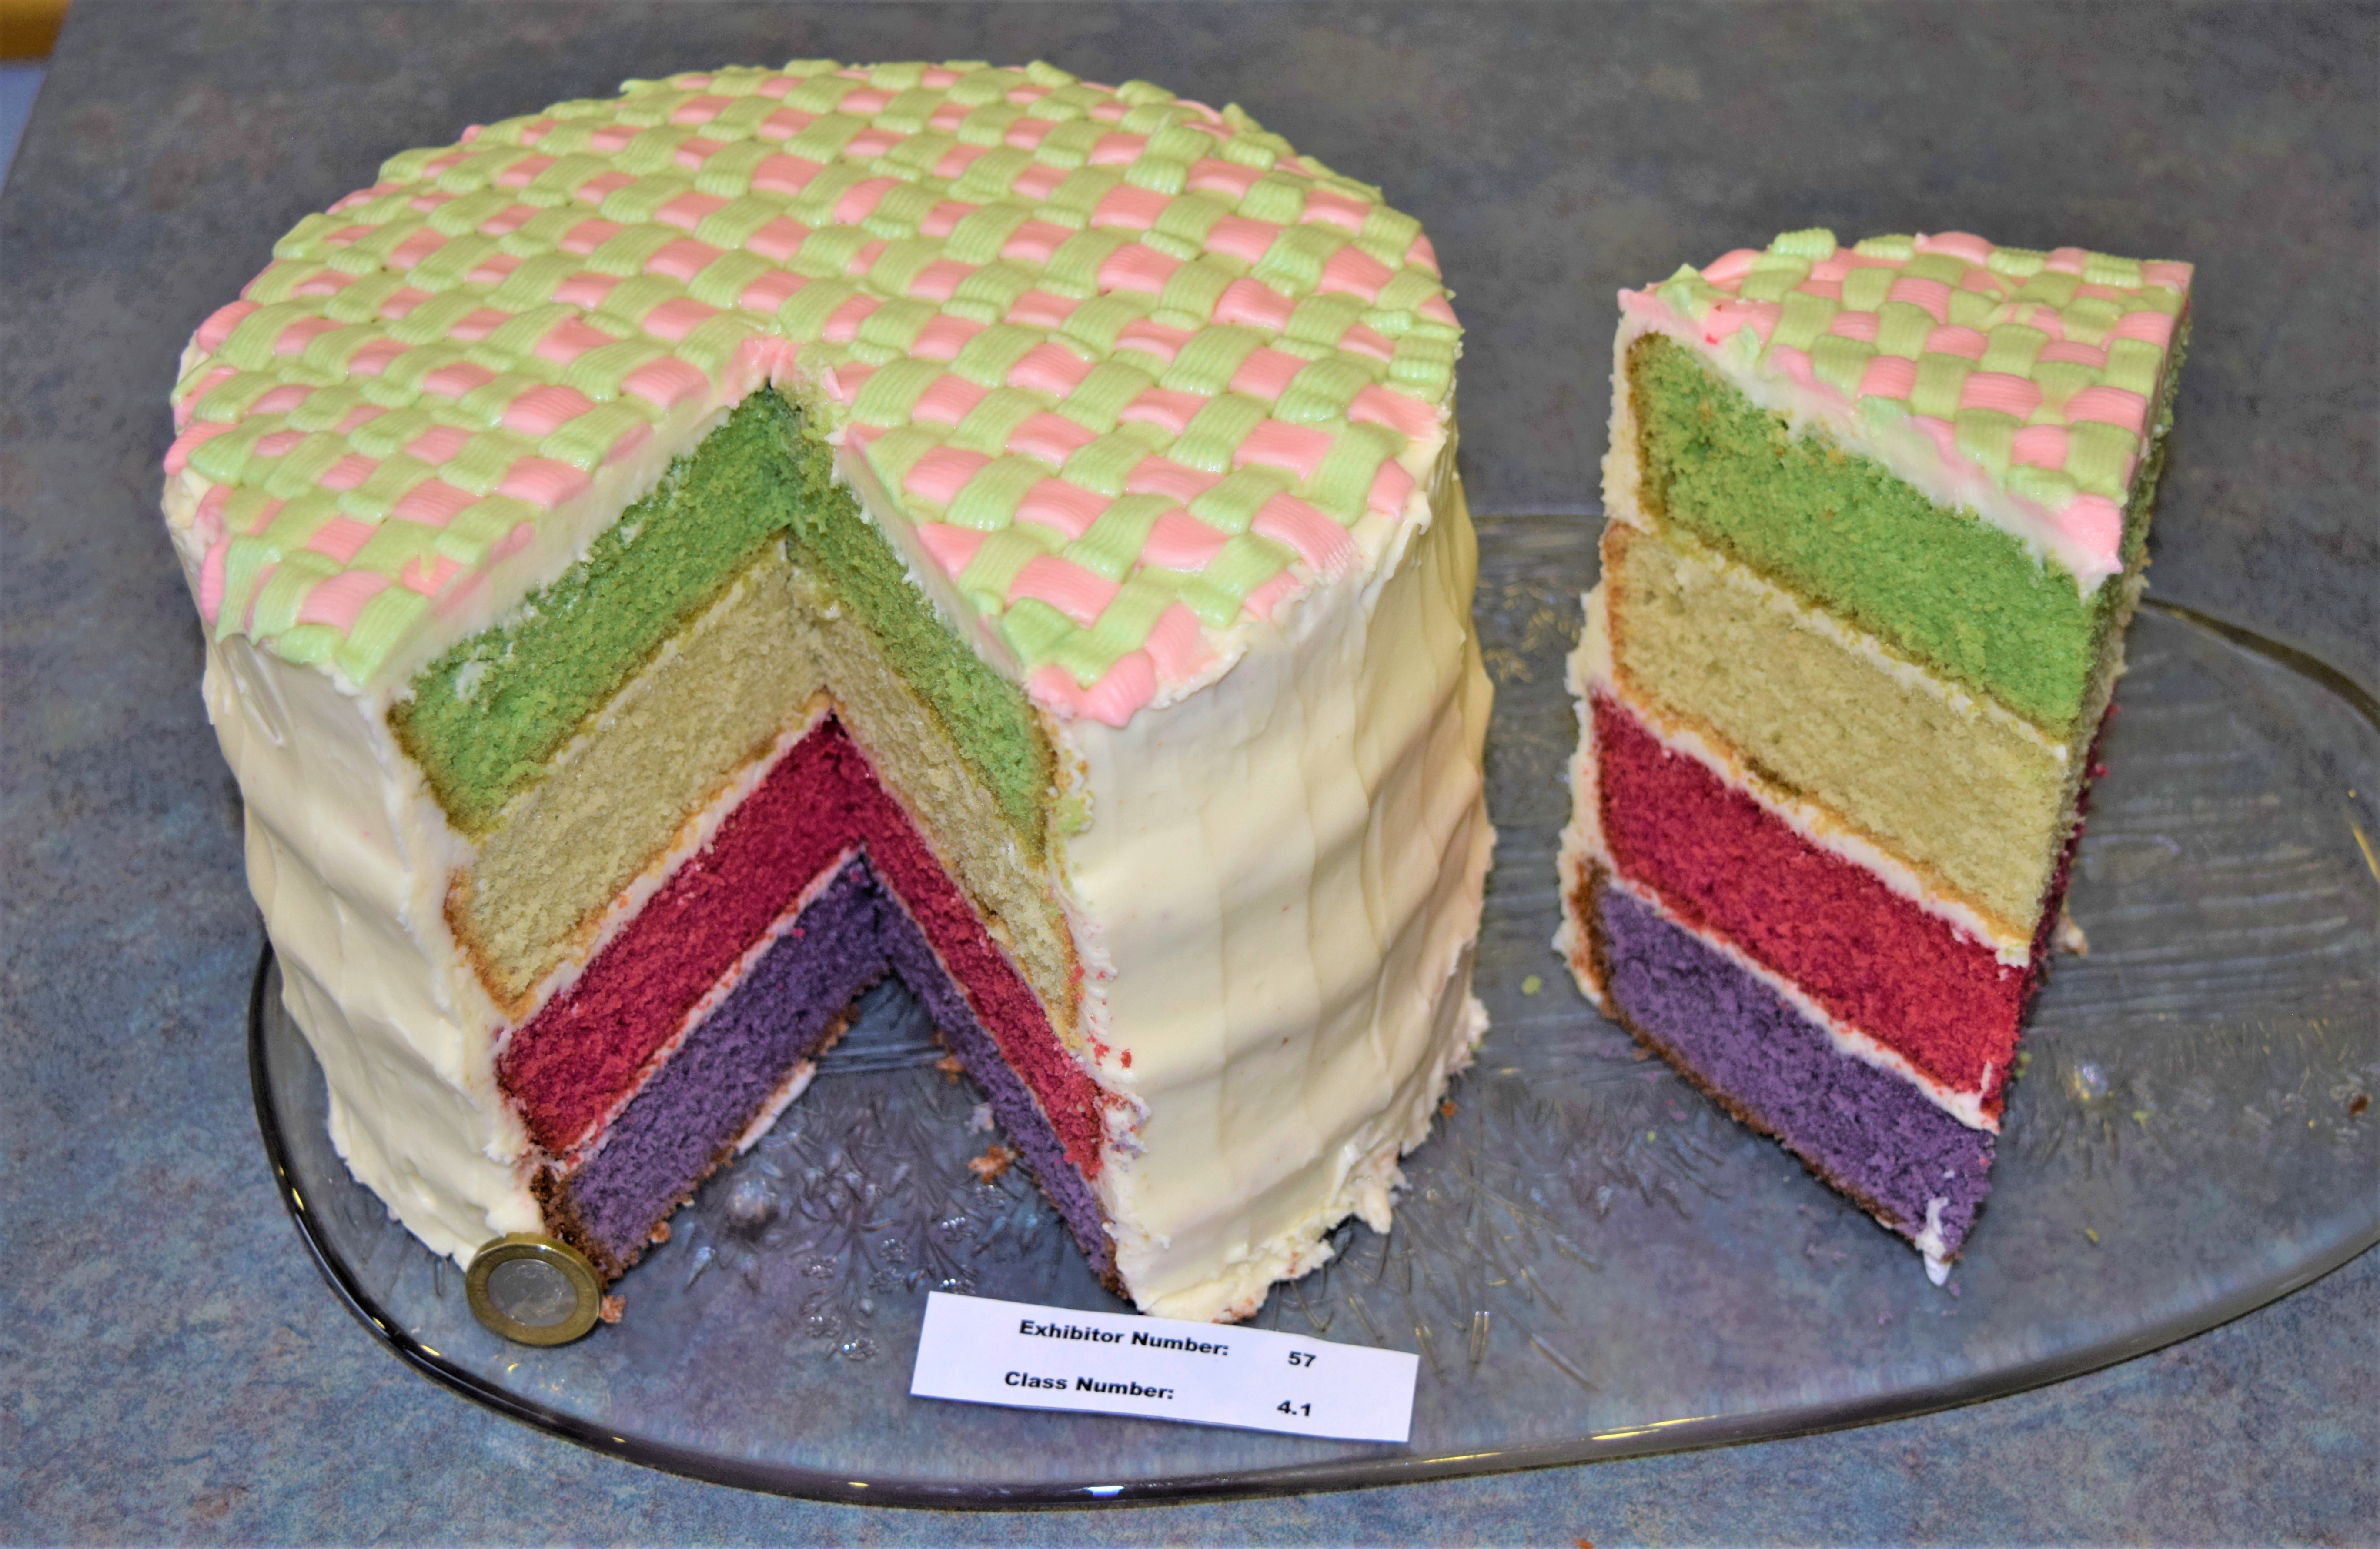 Best in Section Rosette: Awarded to E Bryson for her entry in Class 4.1: A four layered cake of different colours